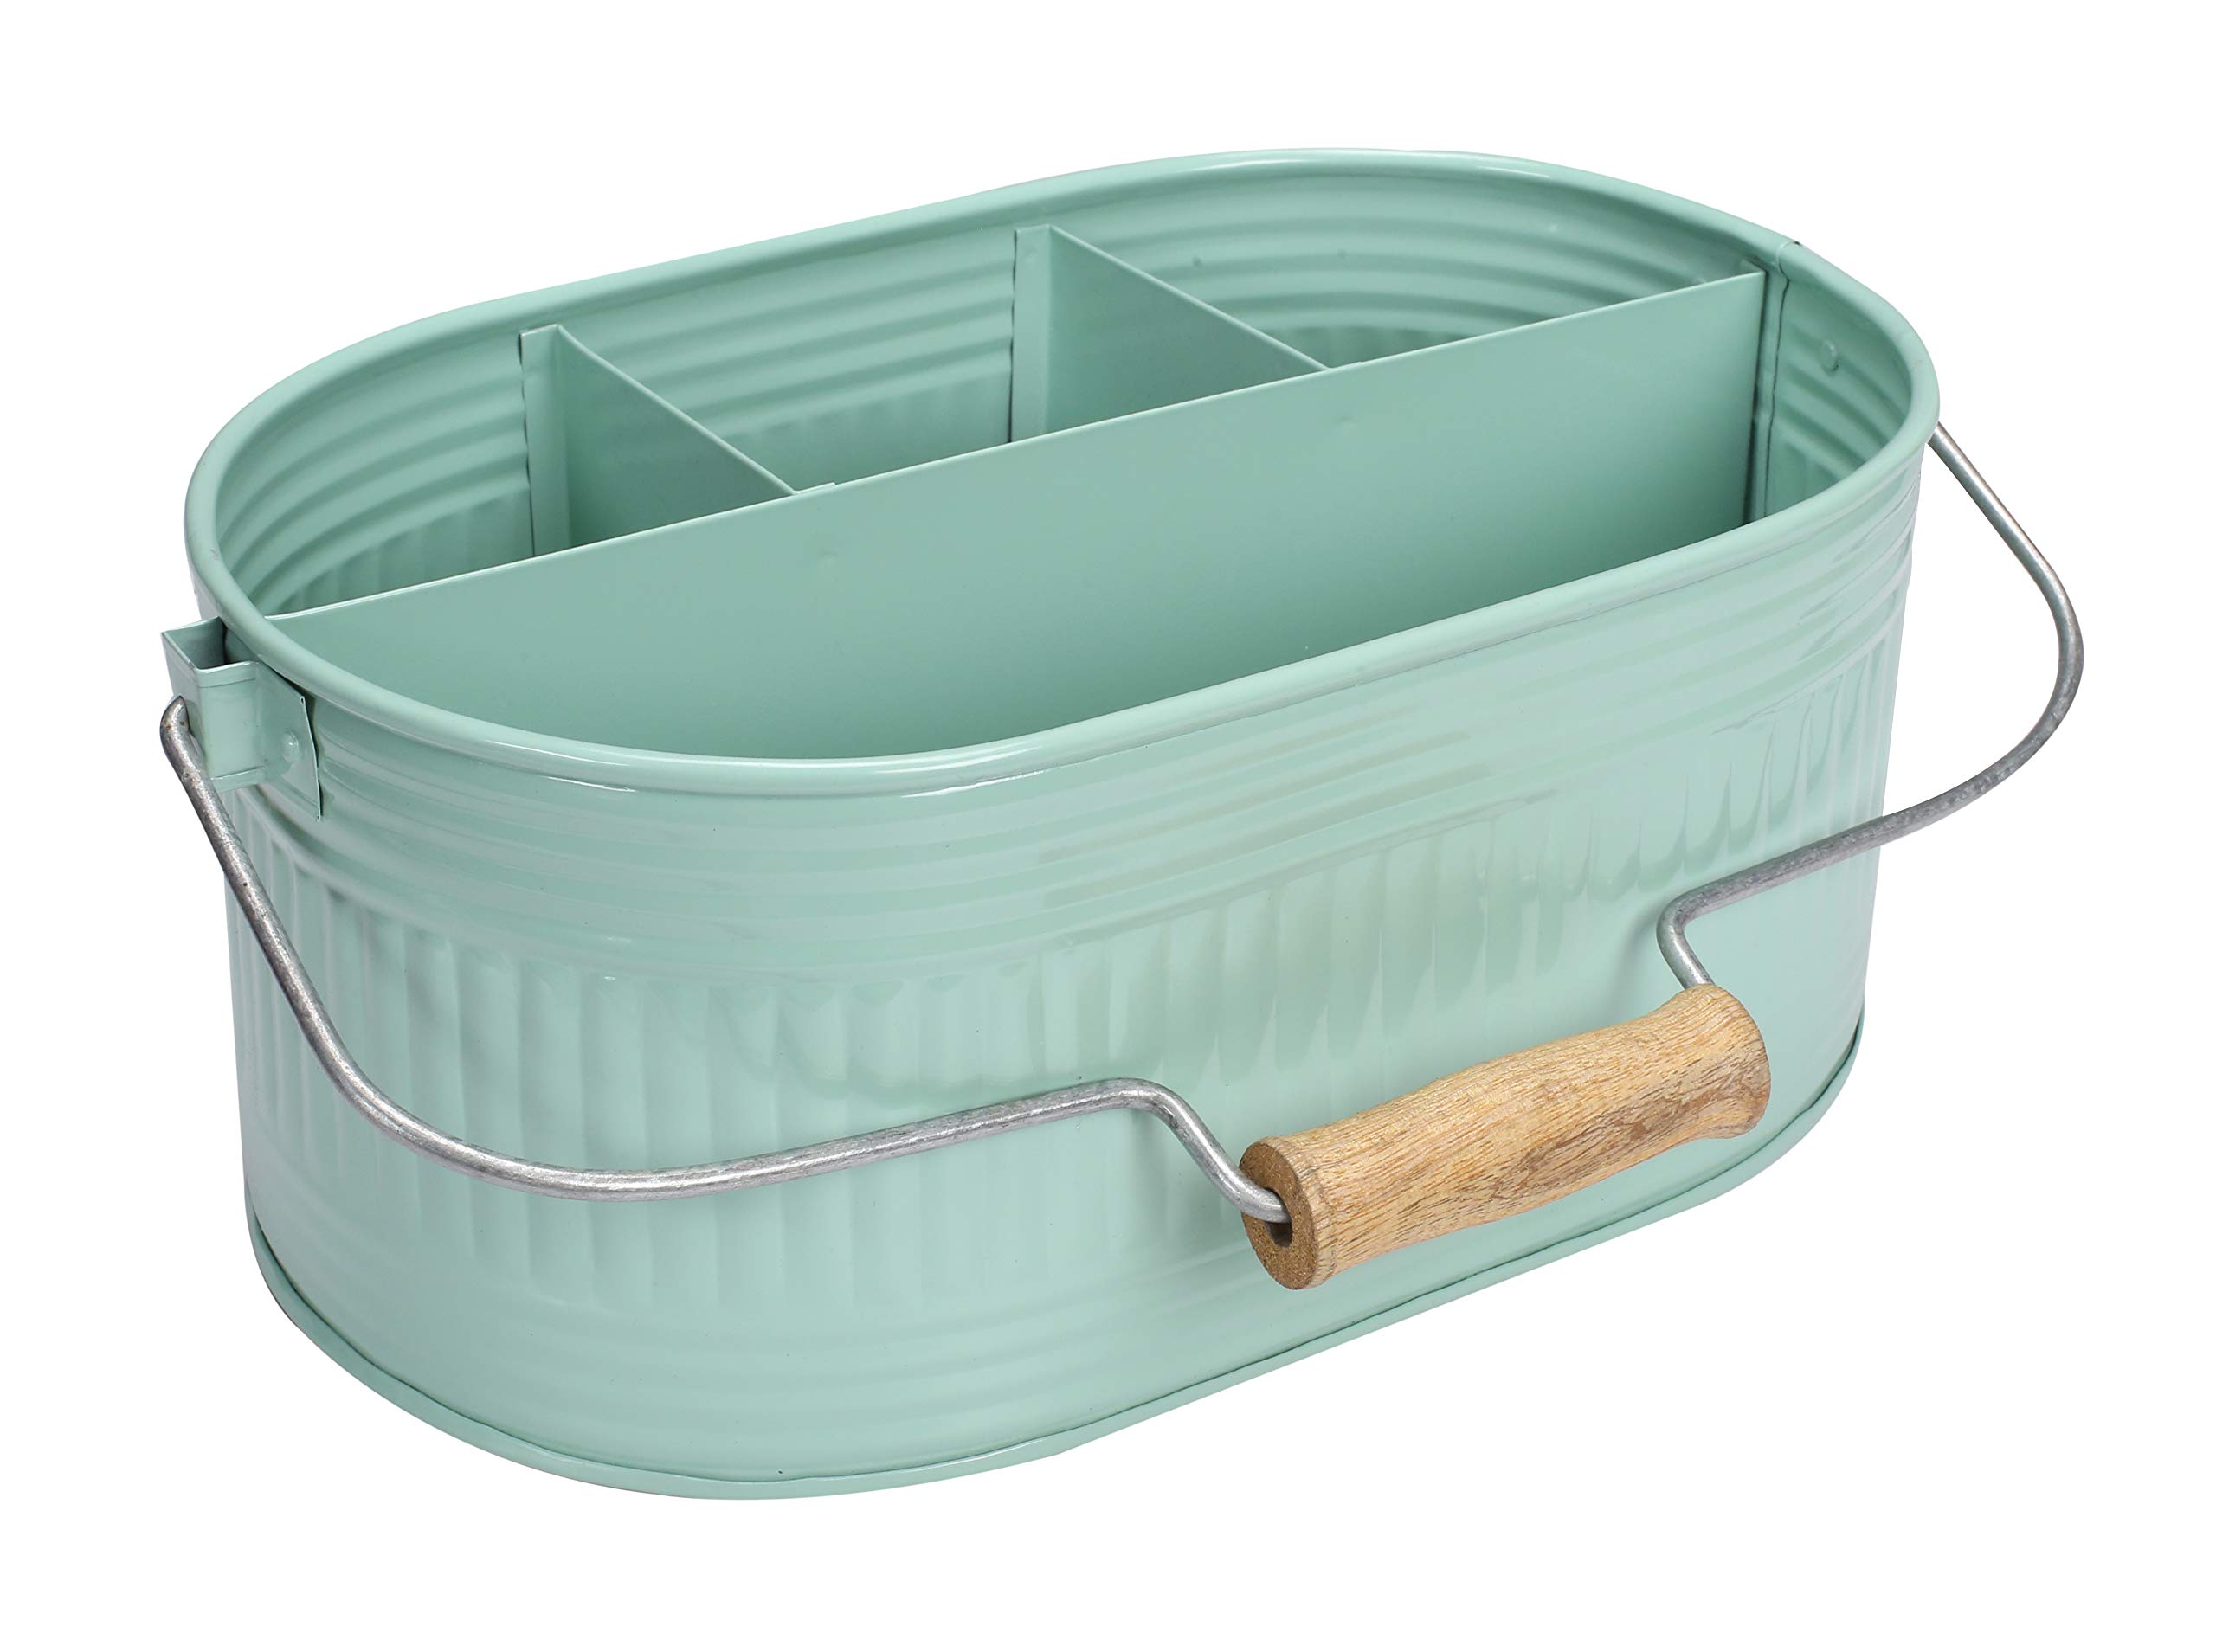 utensil caddy for parties, utensil caddy for countertop, kitchen utensil caddy, plate and utensil caddy - picnic utensil caddy, kitchen utensil caddy for countertop - 13.5 Inches (Mint Green)